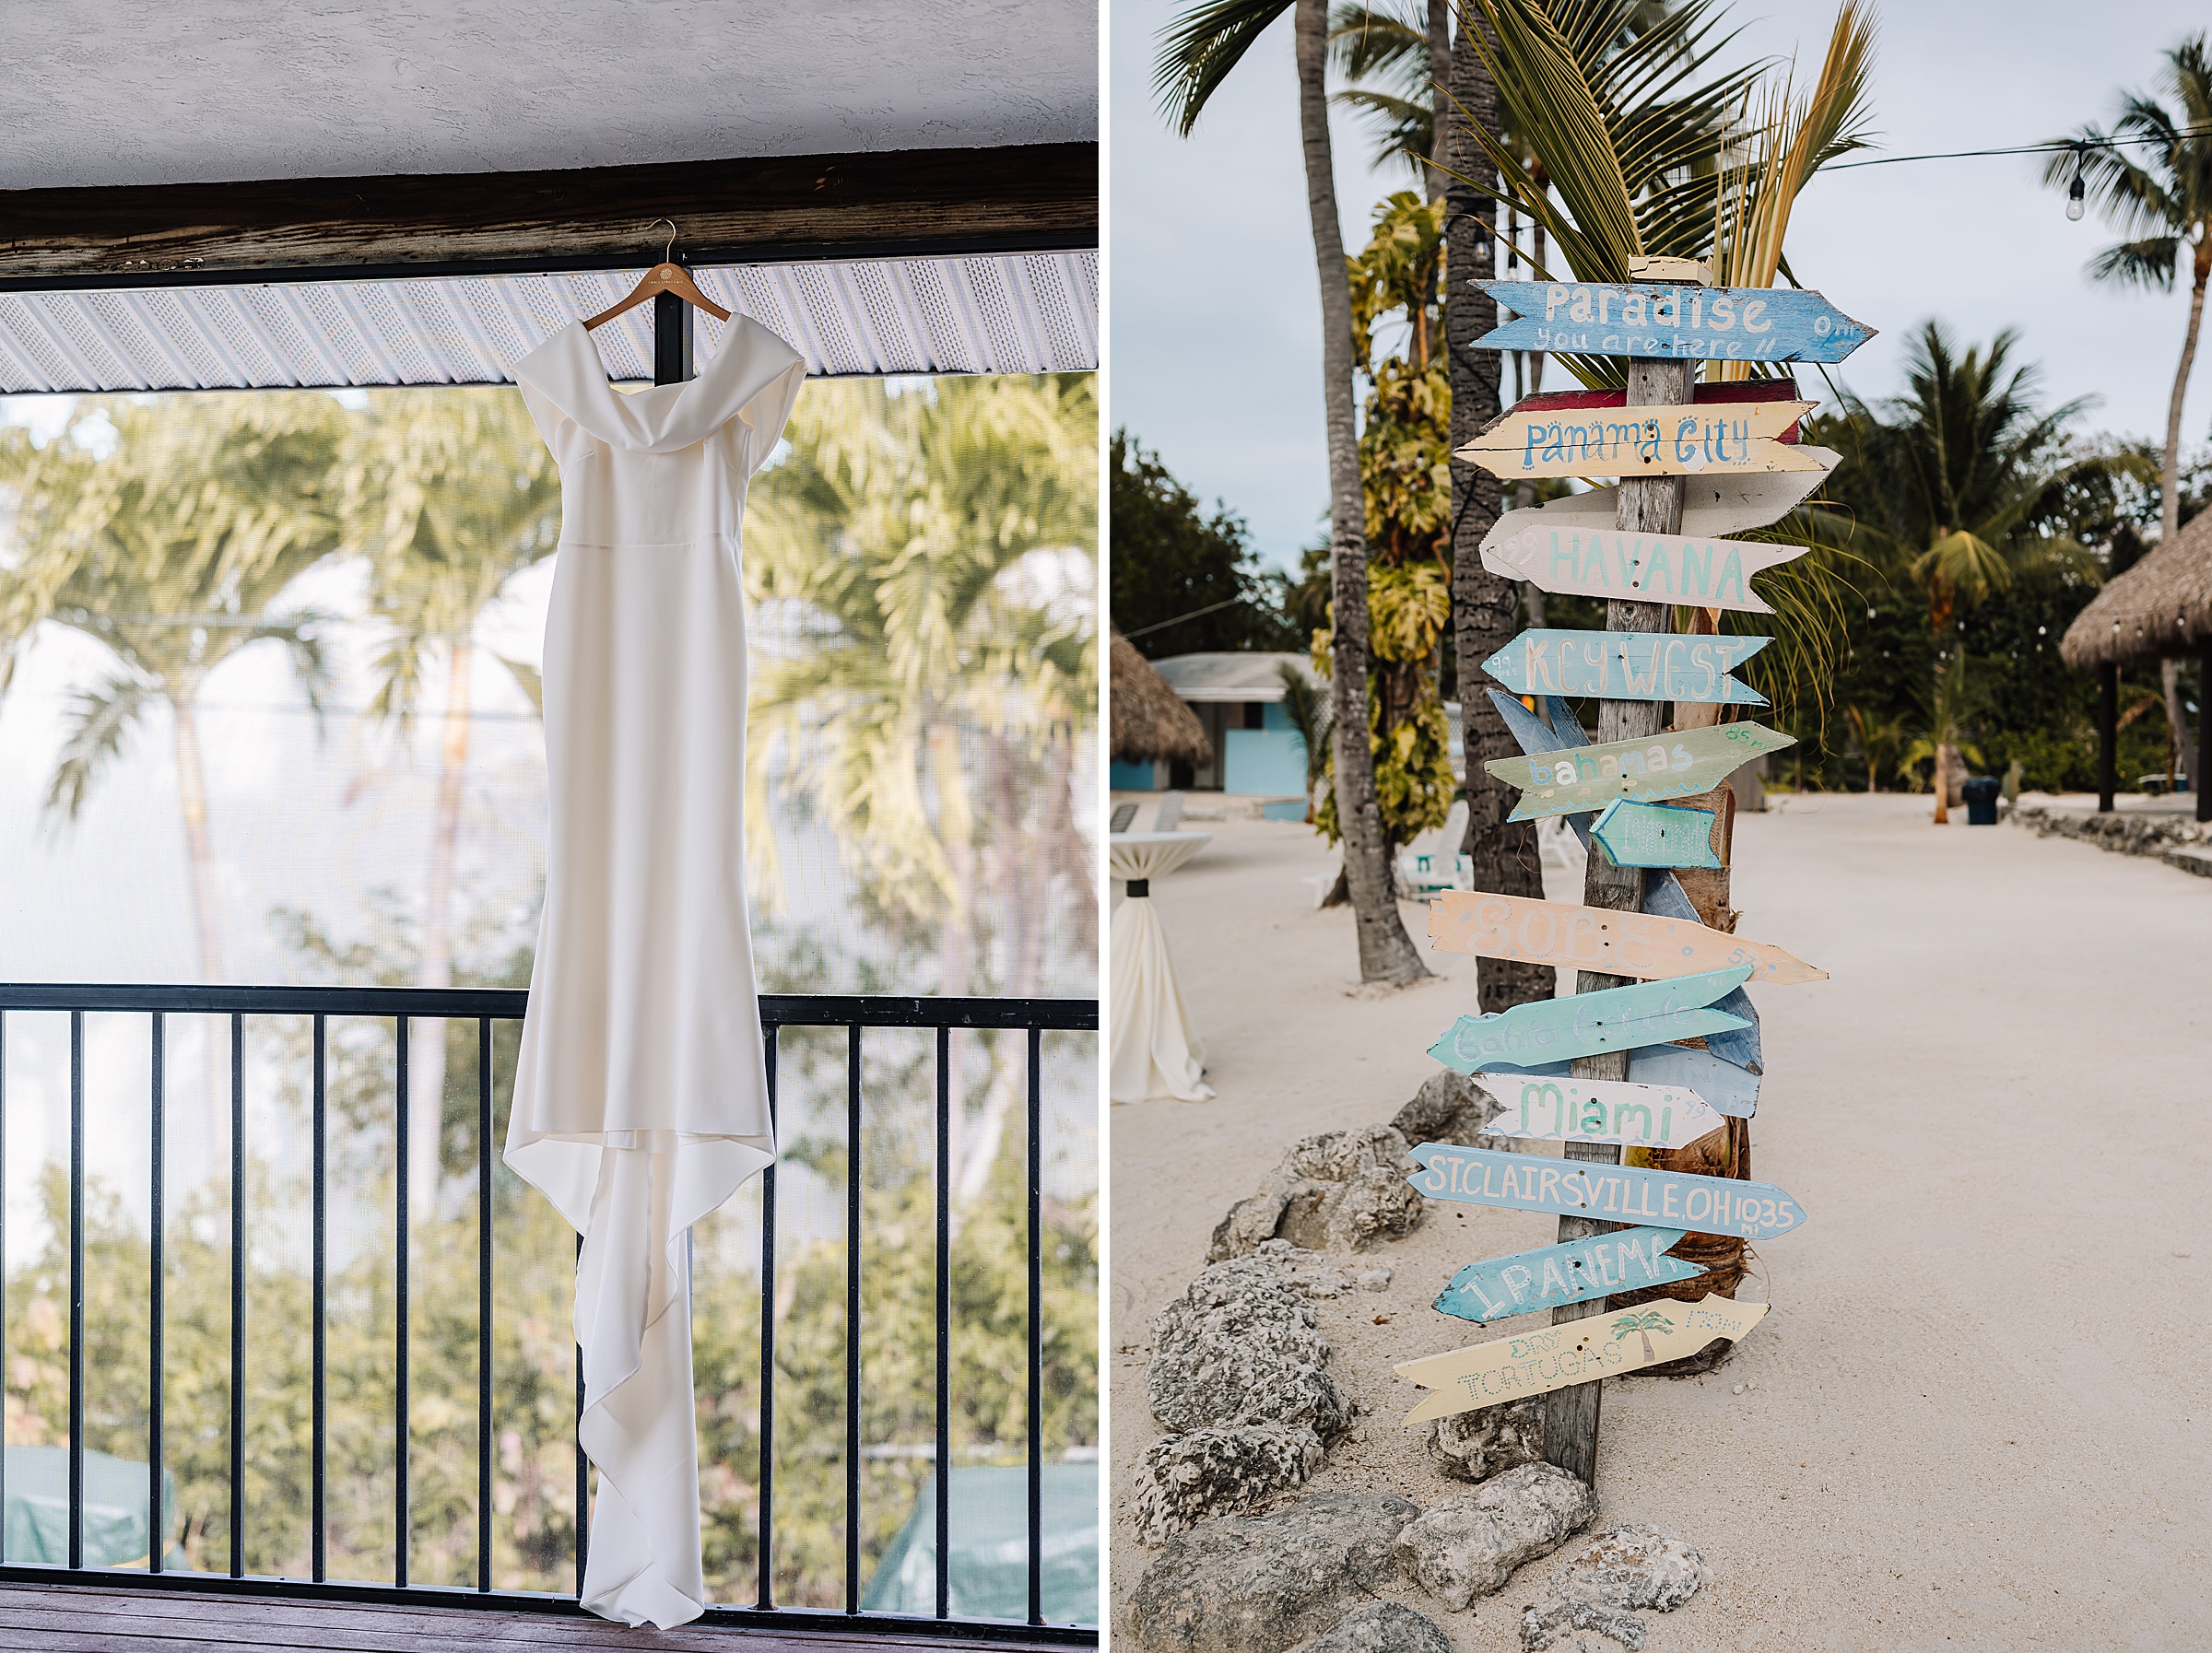 Rustic wedding signage surrounded by tropical foliage at a Key Largo wedding venue.